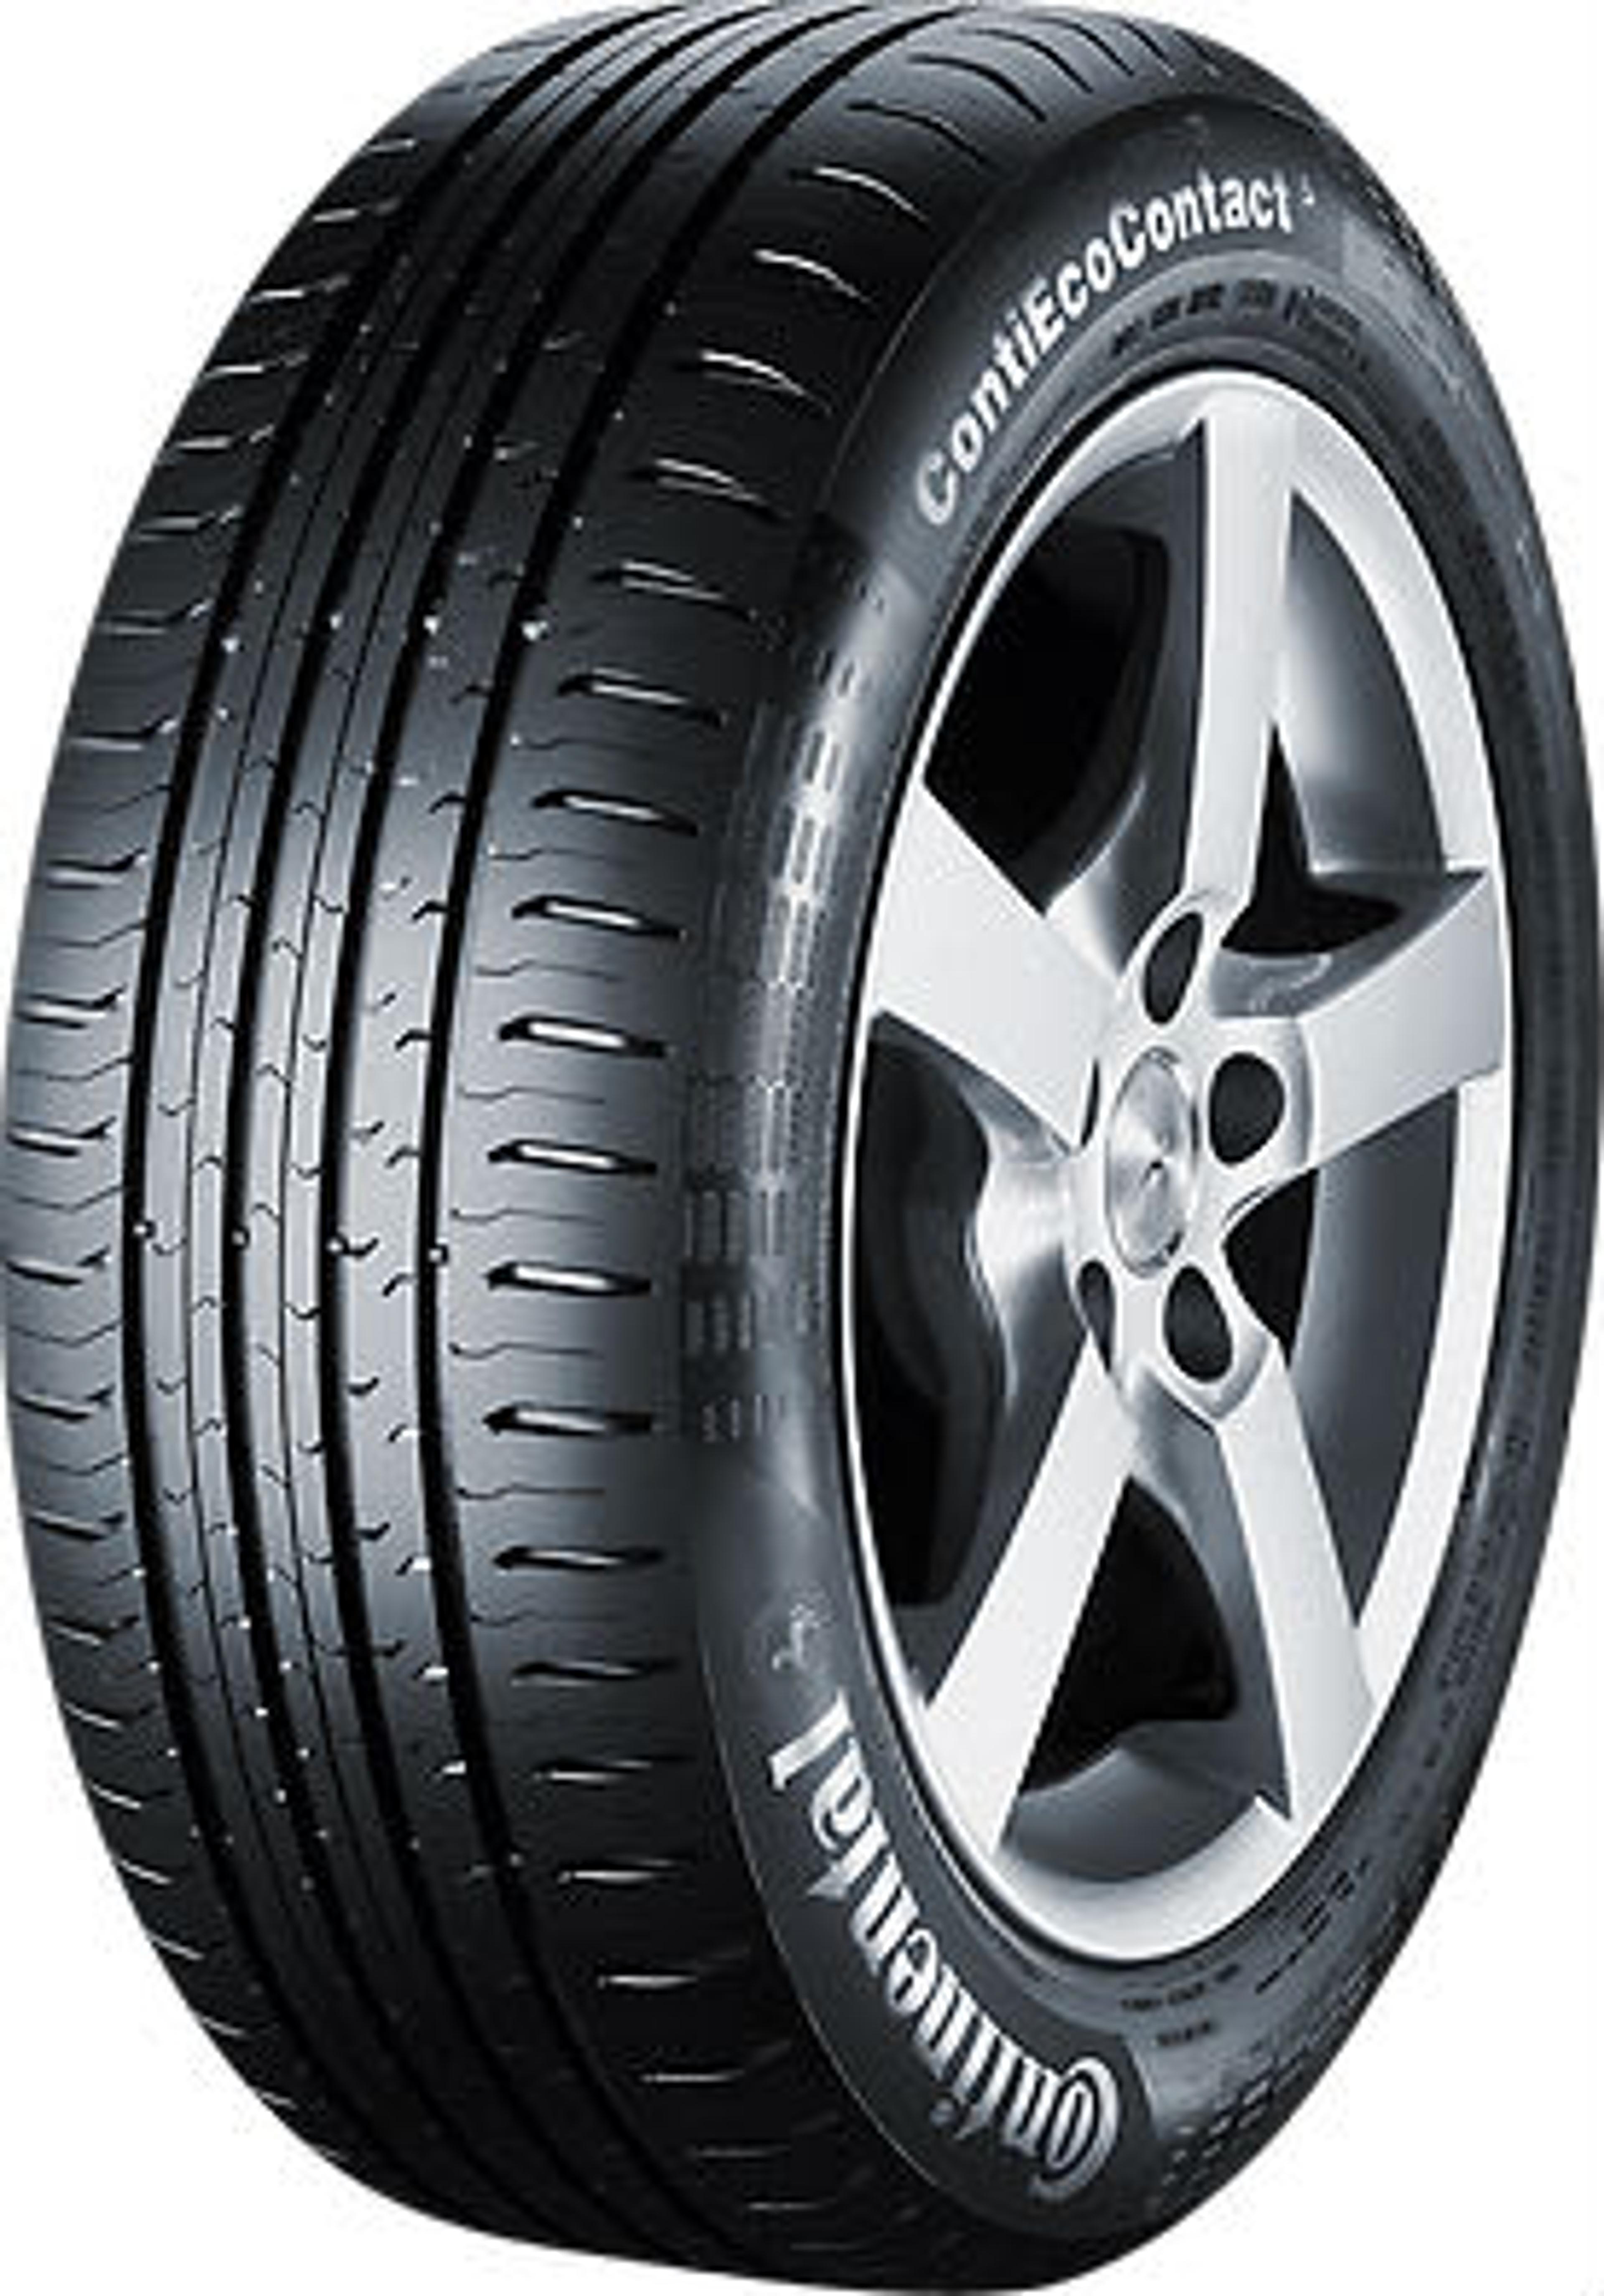 | Online SimpleTire Buy 5 ContiEcoContact Tires Continental